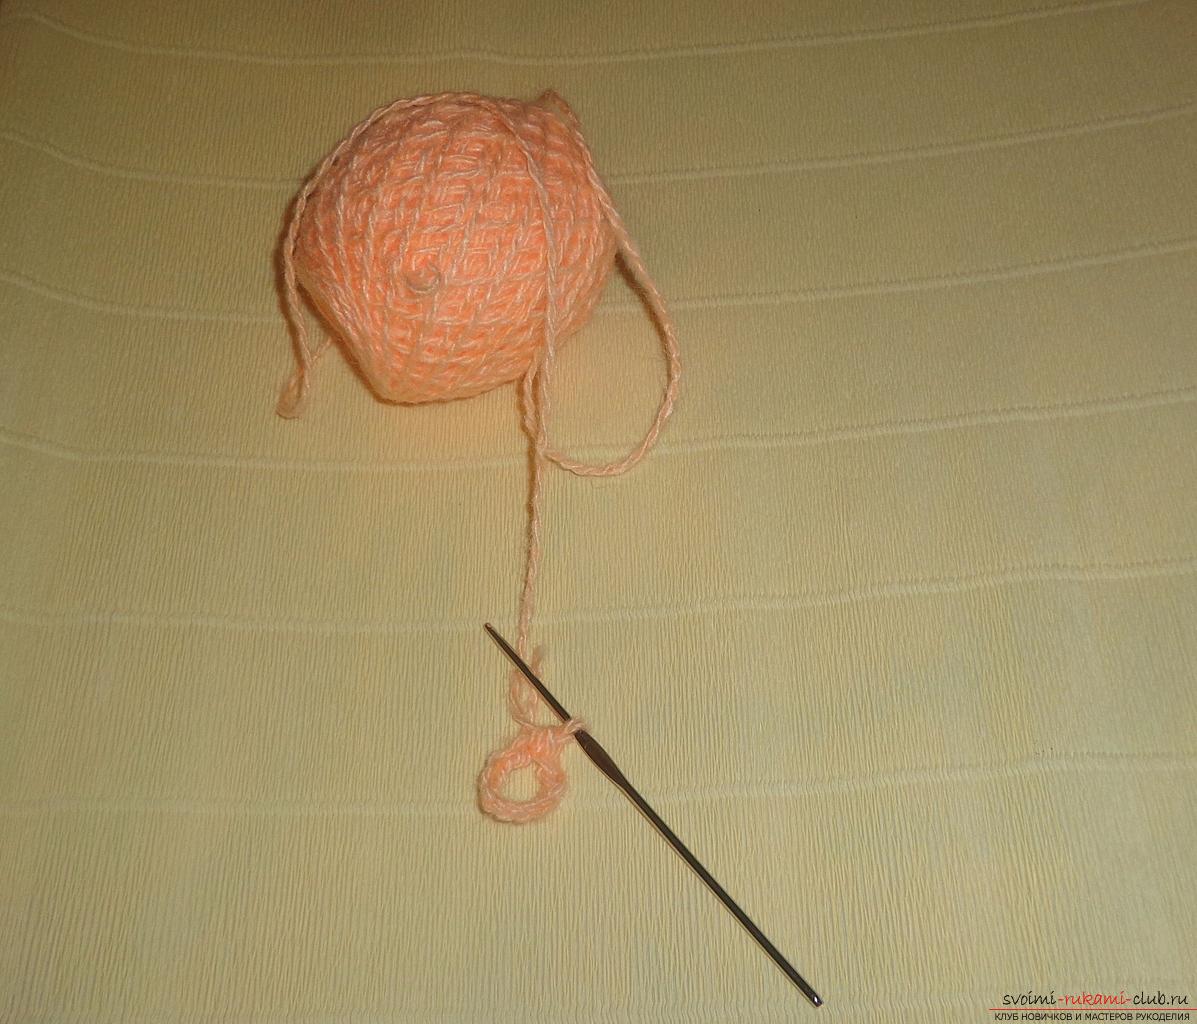 This master class of crochet crochet contains a rose pattern and a description of knitting .. Photo # 17